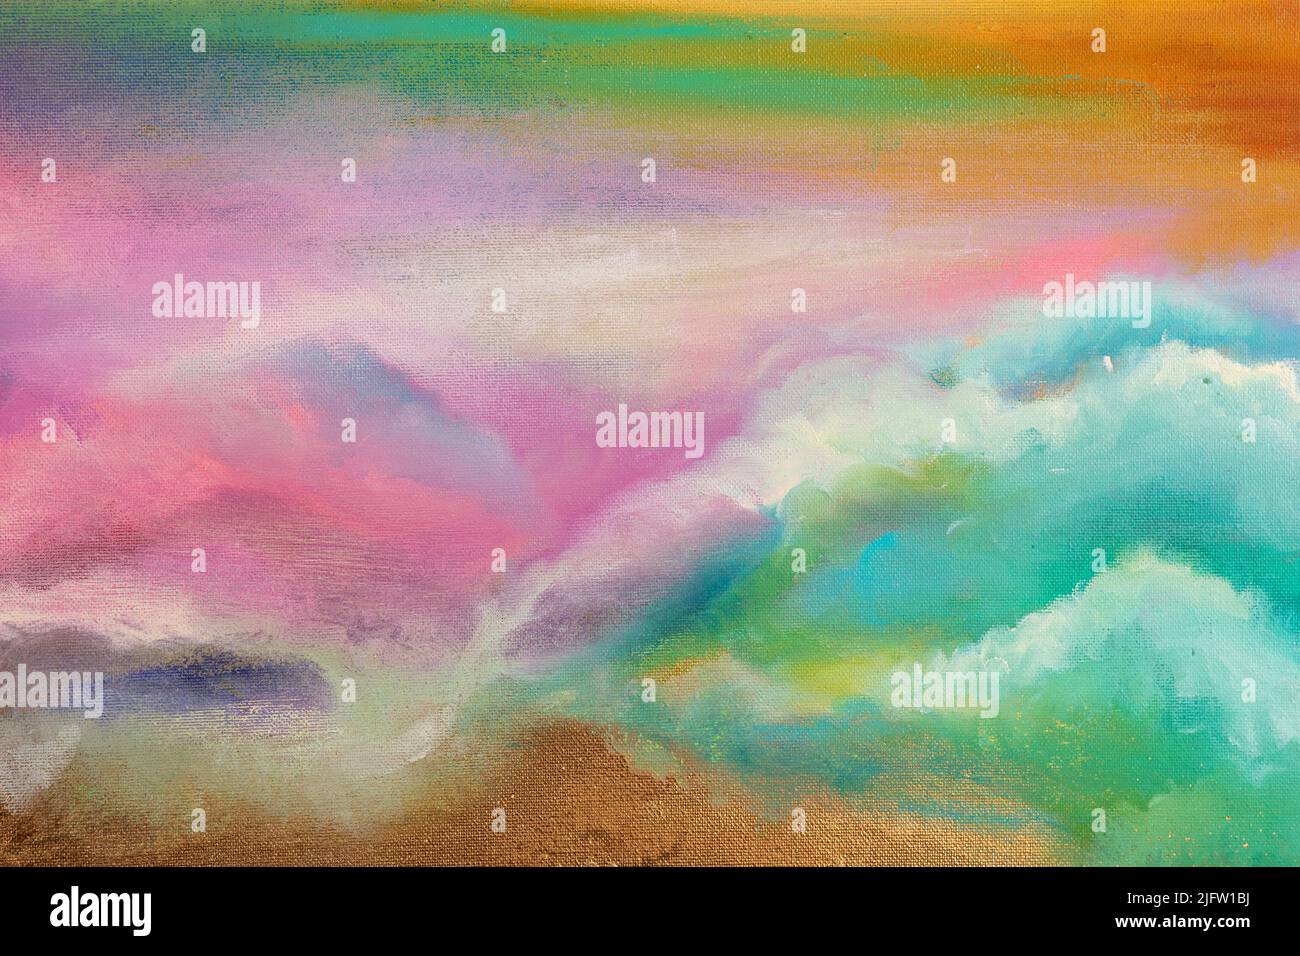 Abstract painting texture with a colorful sky on the background. Stock Photo